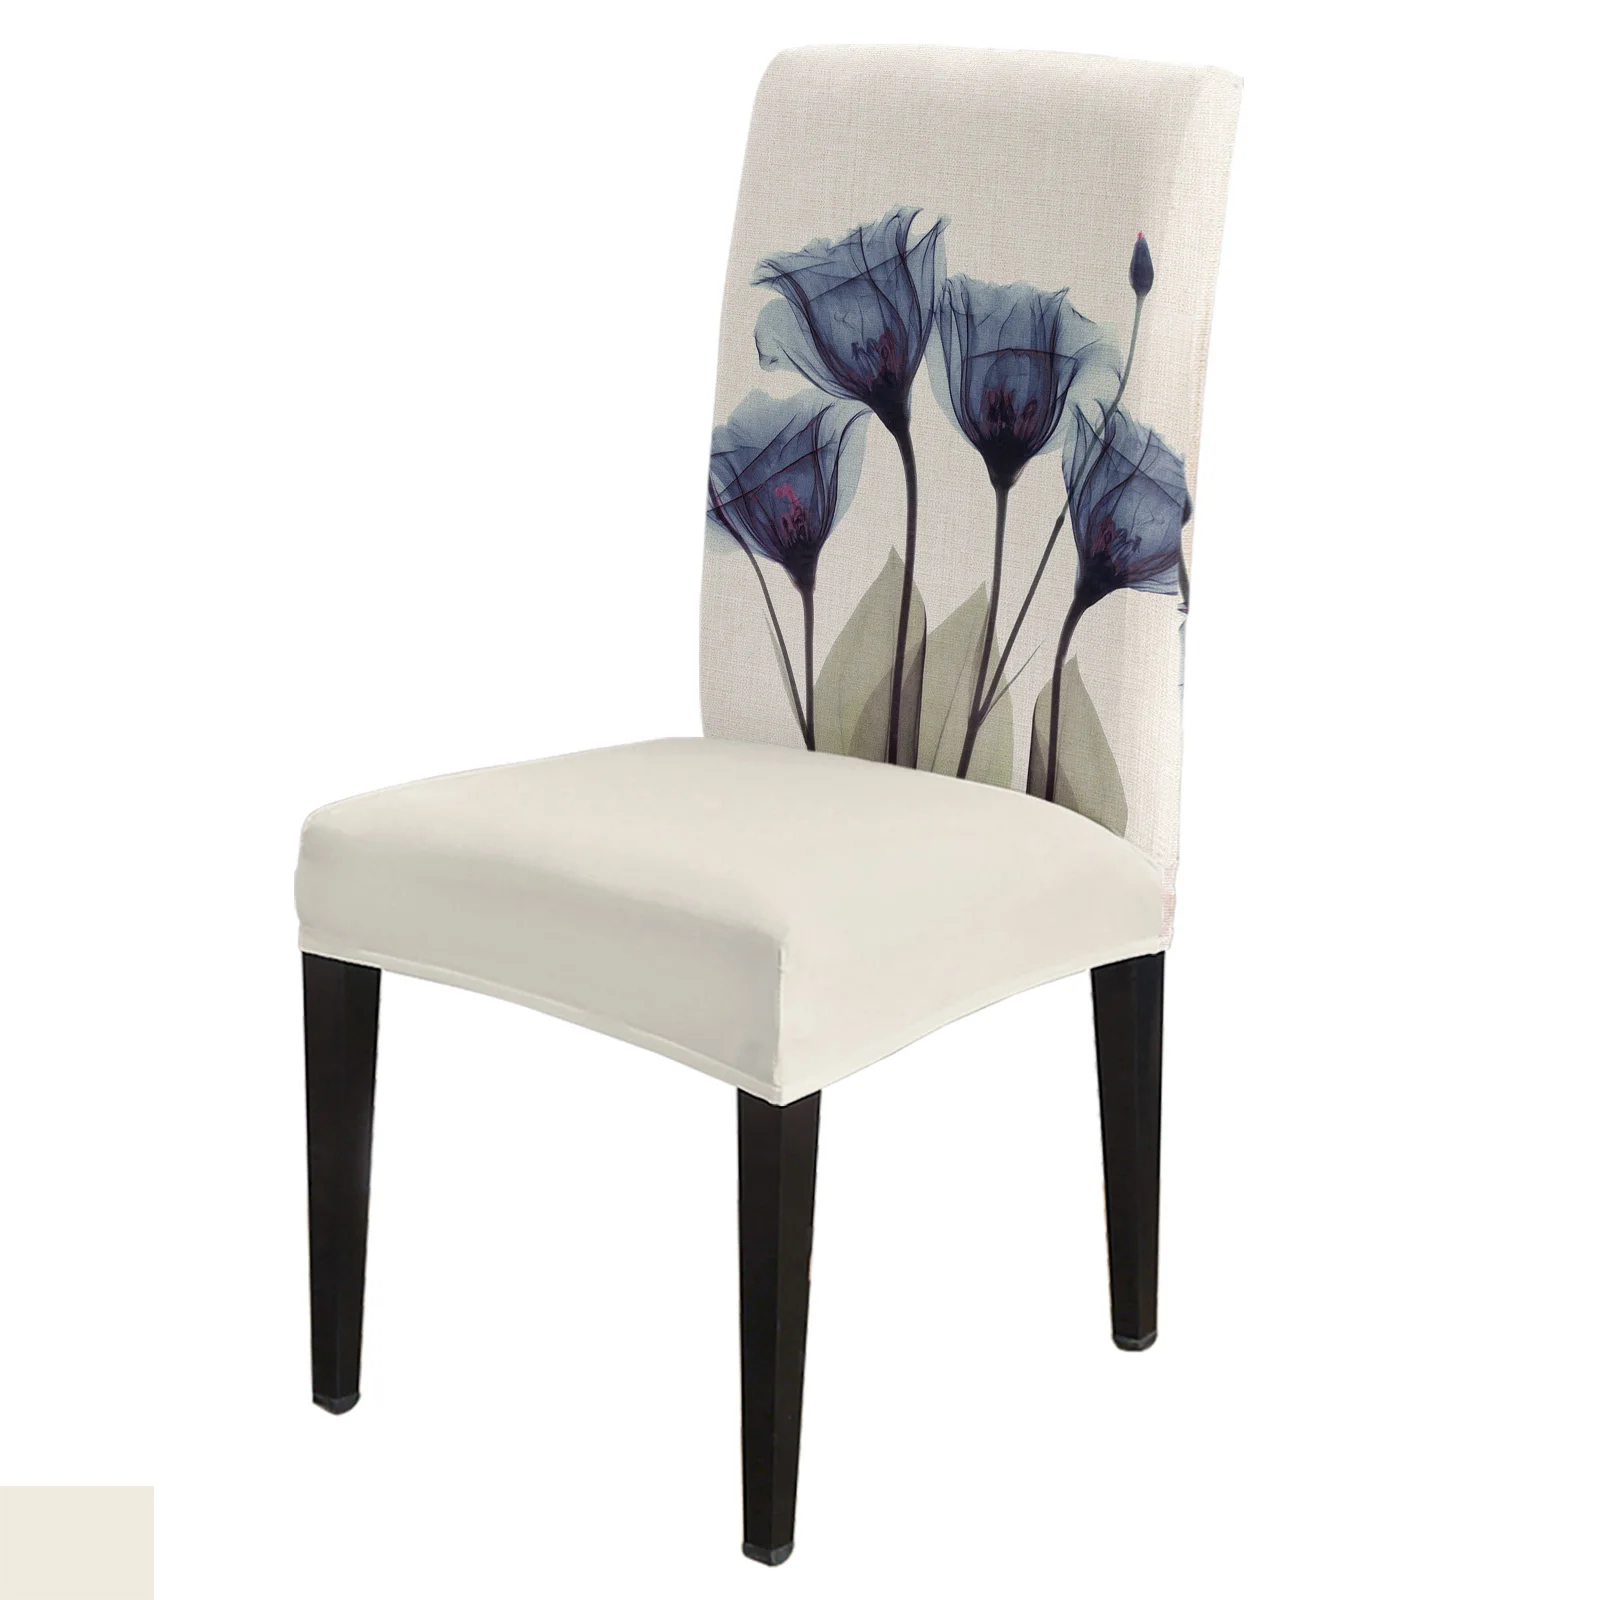 

Flower Summer Idyllic Blue Tulip Chair Covers Dining Room Weddings Banquet Stretch Chair Cover Kitchen Spandex Chair Cover